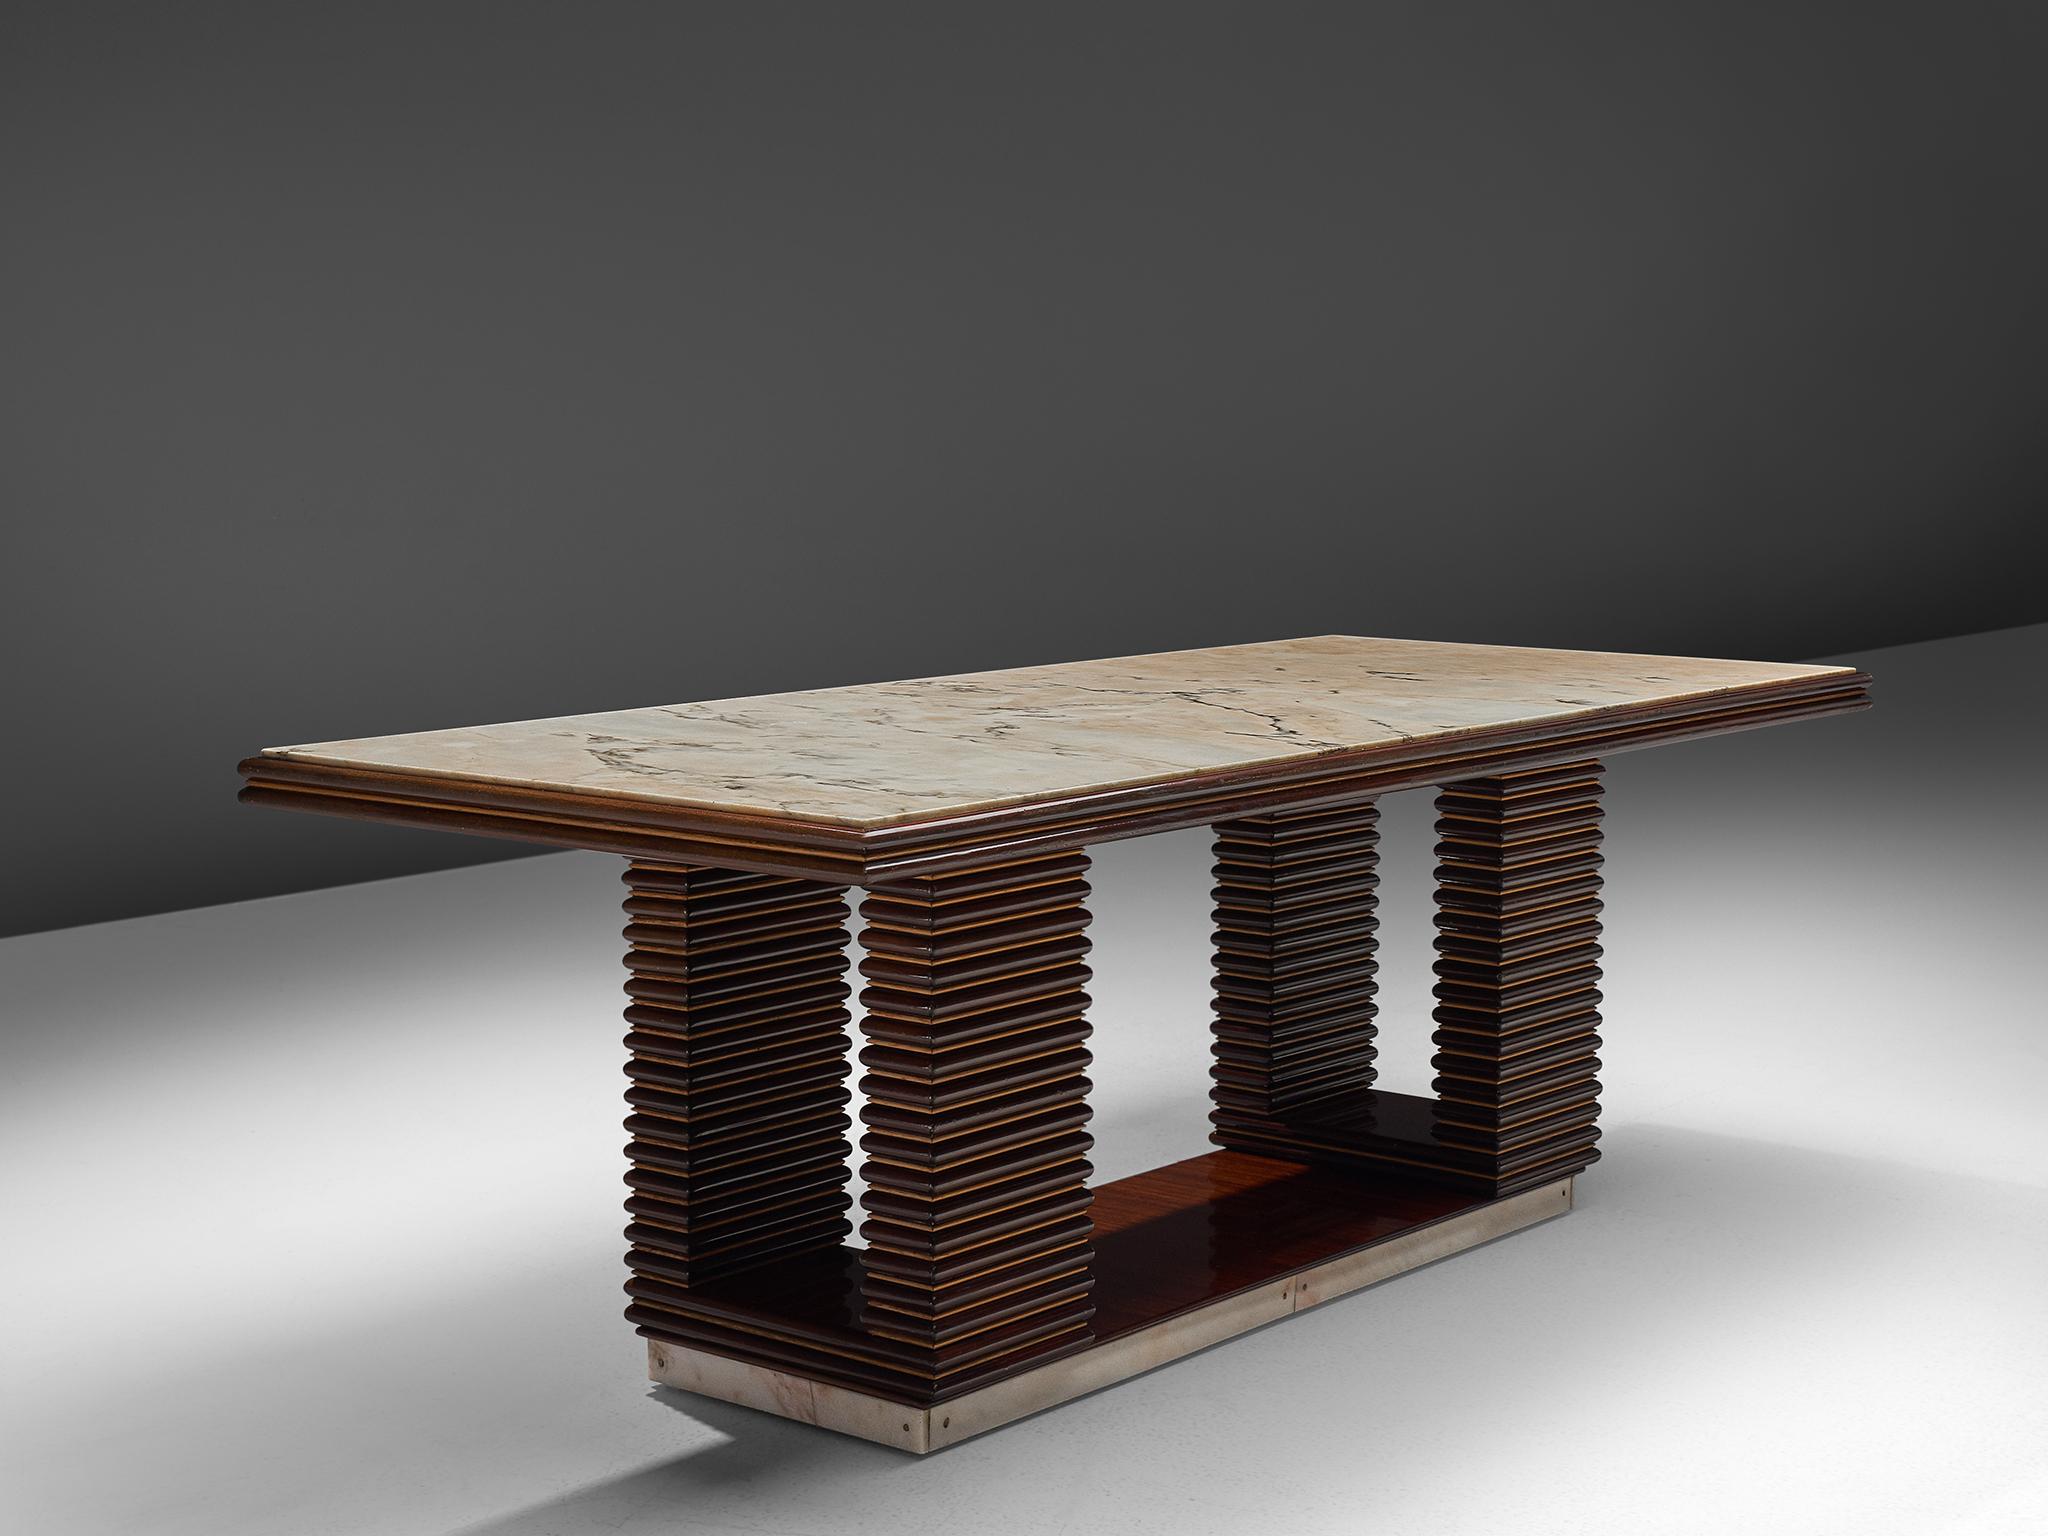 Dining table, marble, wood, Italy, 1960s.

Art Deco style marble table designed with a large rectangular top and four structured, ribbed dark wooden legs. The design of this table is from the 1960s but bears strong notes of 1930s Art Deco, and is